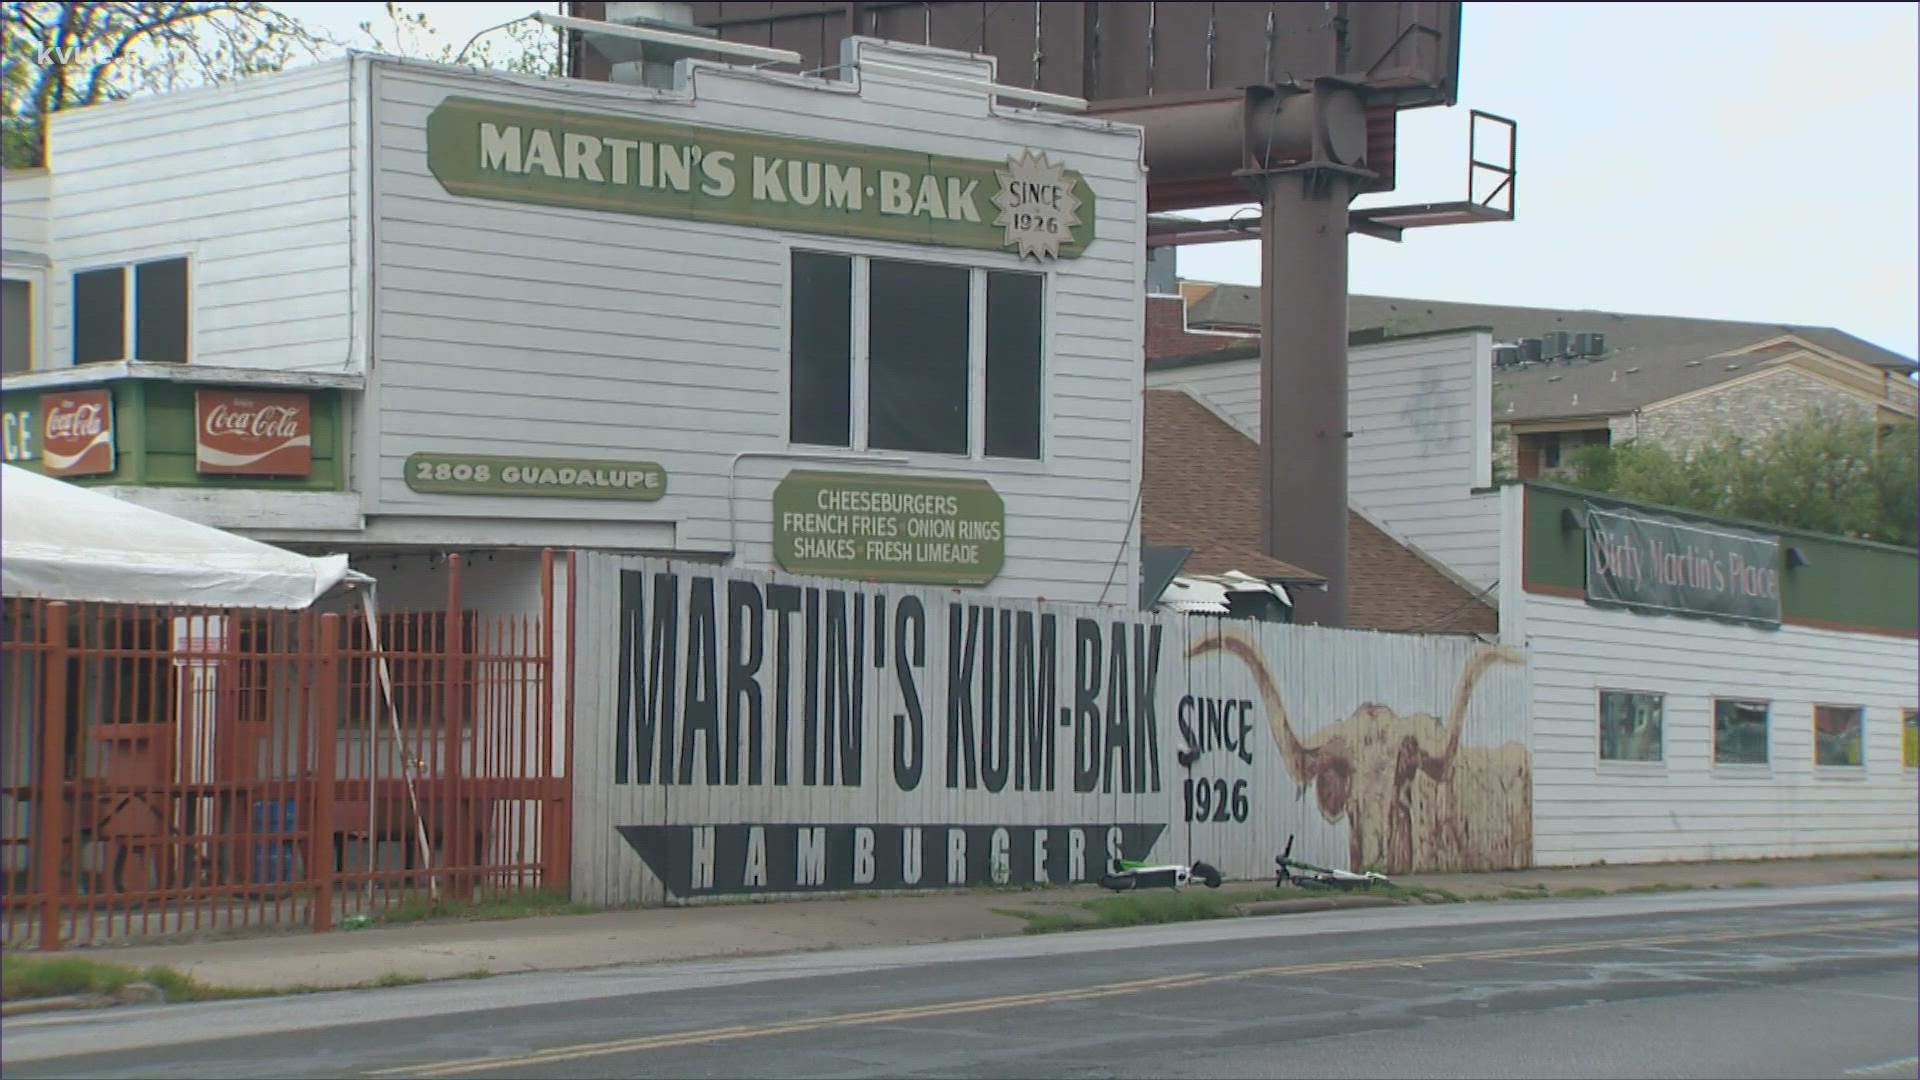 The owner said he will continue fighting for his business in an effort to save it.